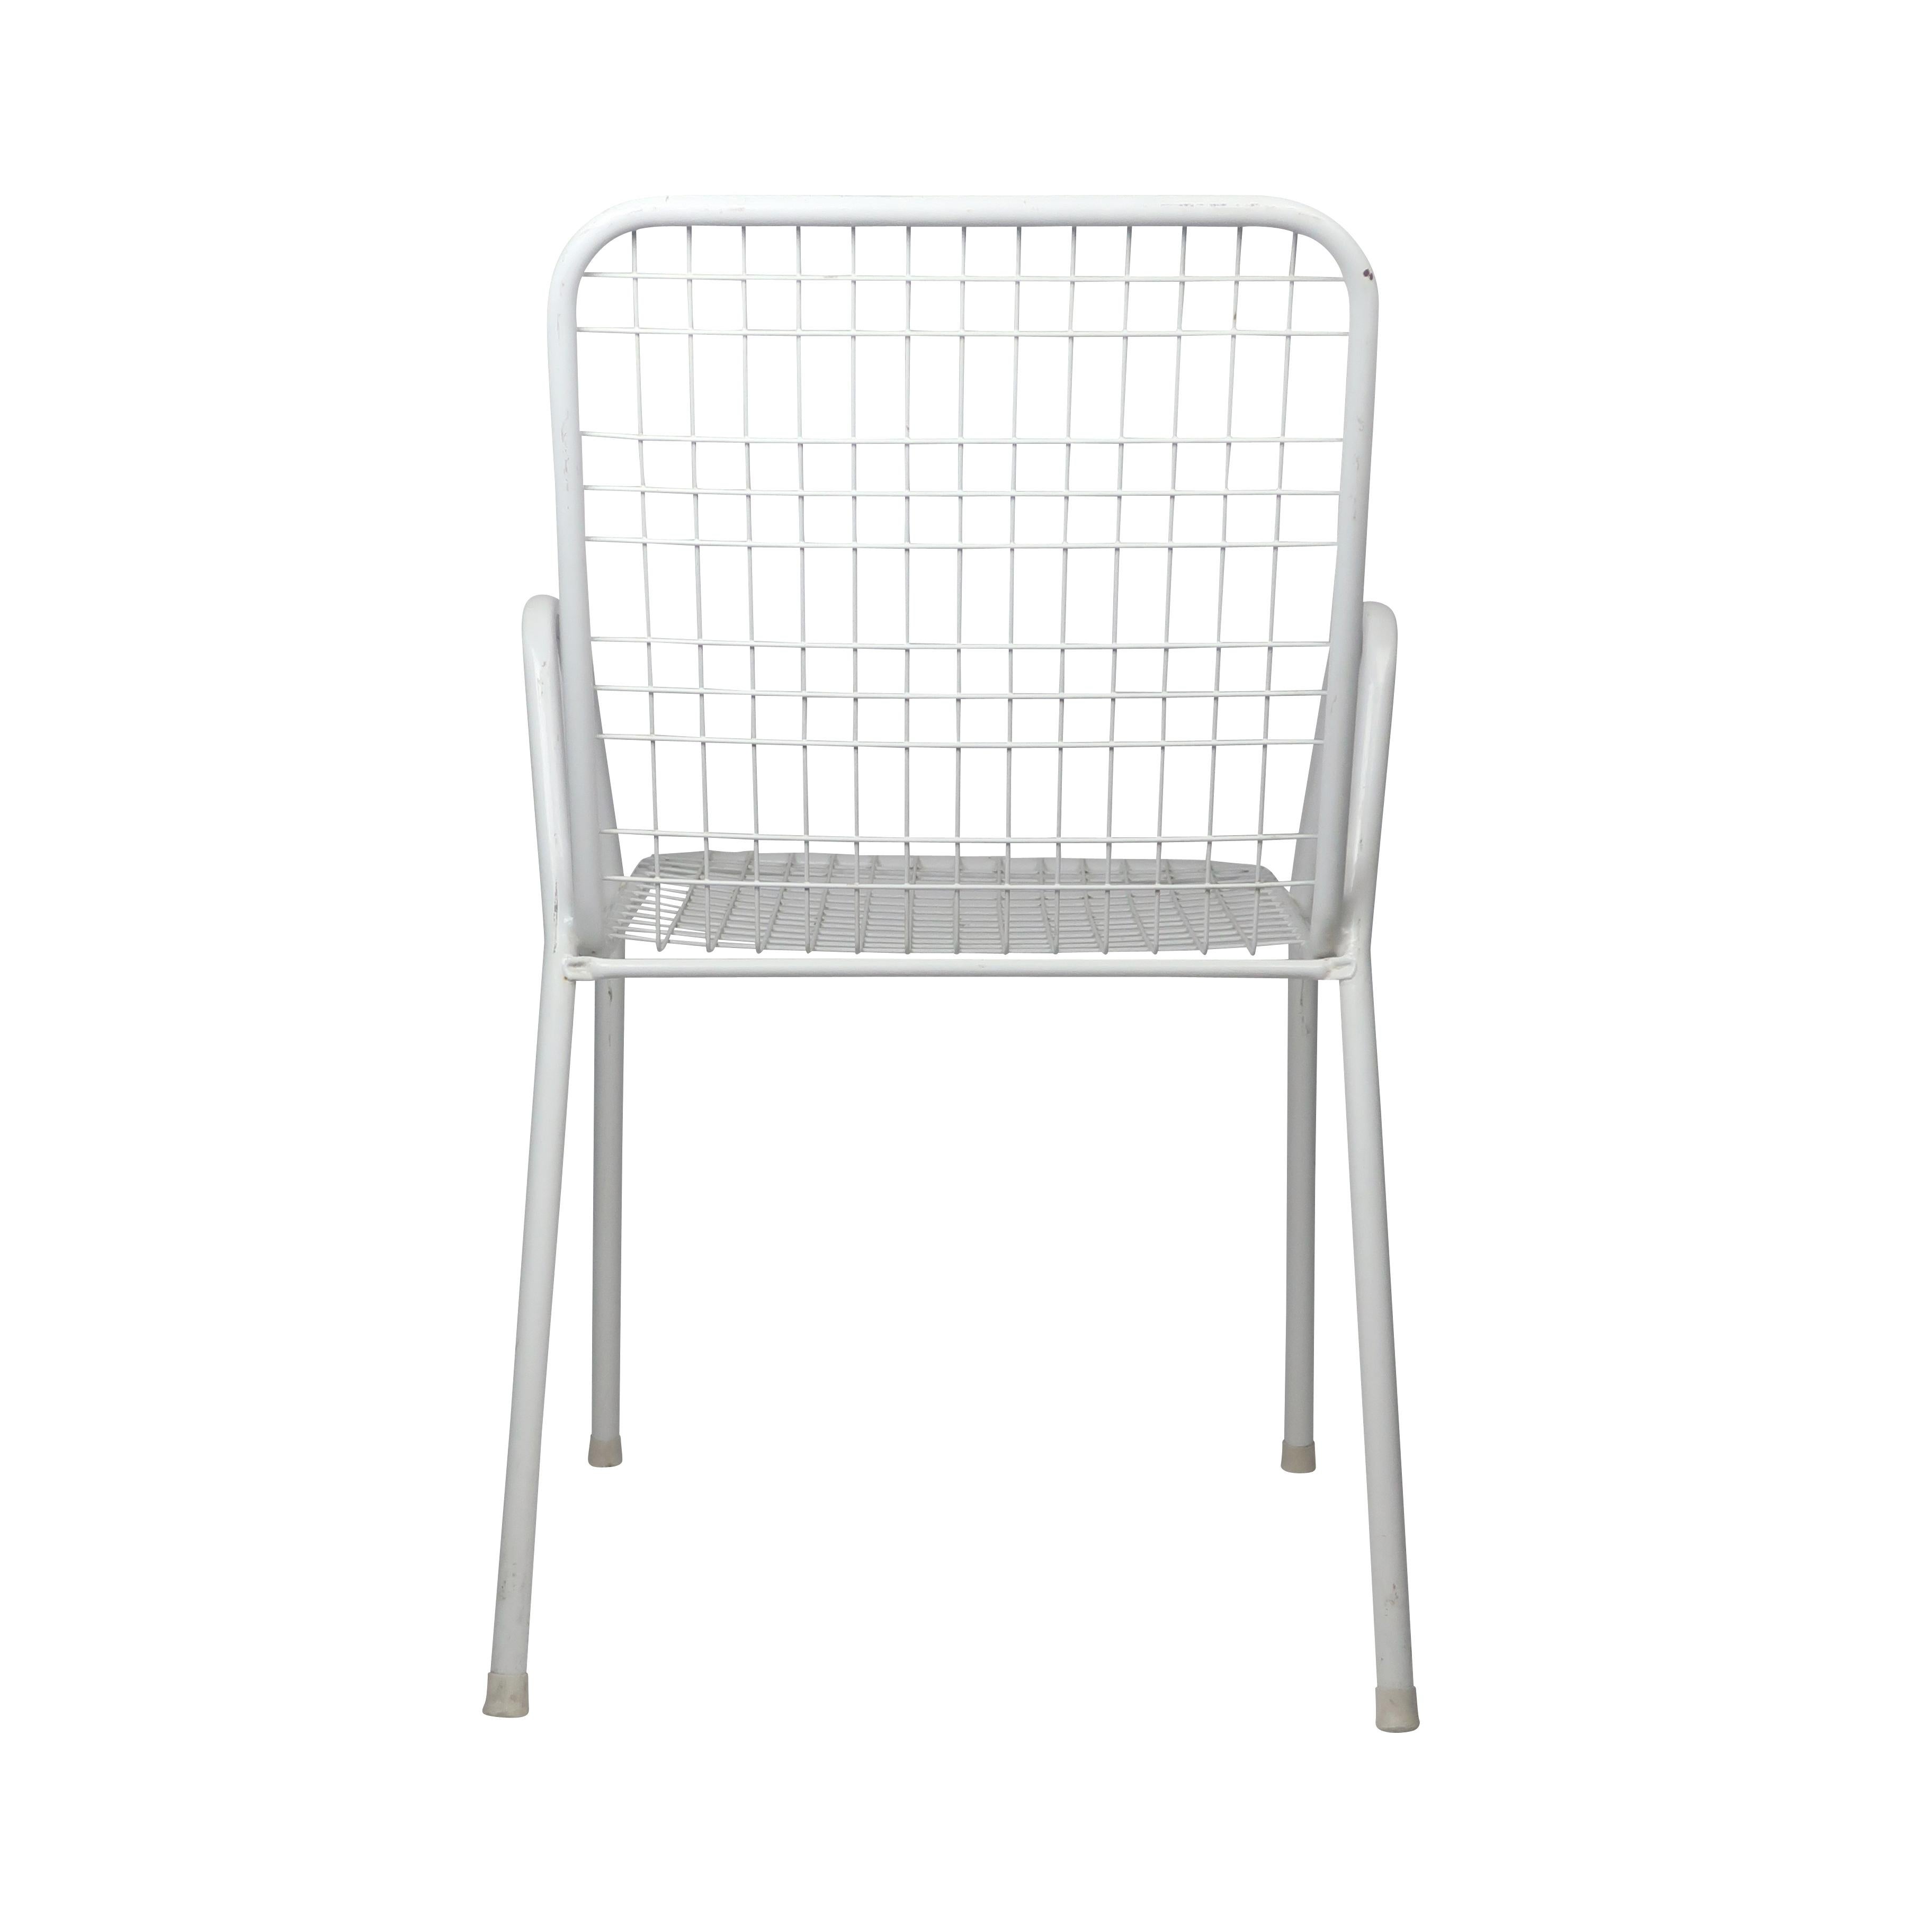 A set of six Rio indoor / outdoor armchairs by Emu. Made with steel wire coated in white resin over a tubular frame, these are lightweight and durable.

In excellent vintage condition with very light yellowing to a few, a few marks on the legs